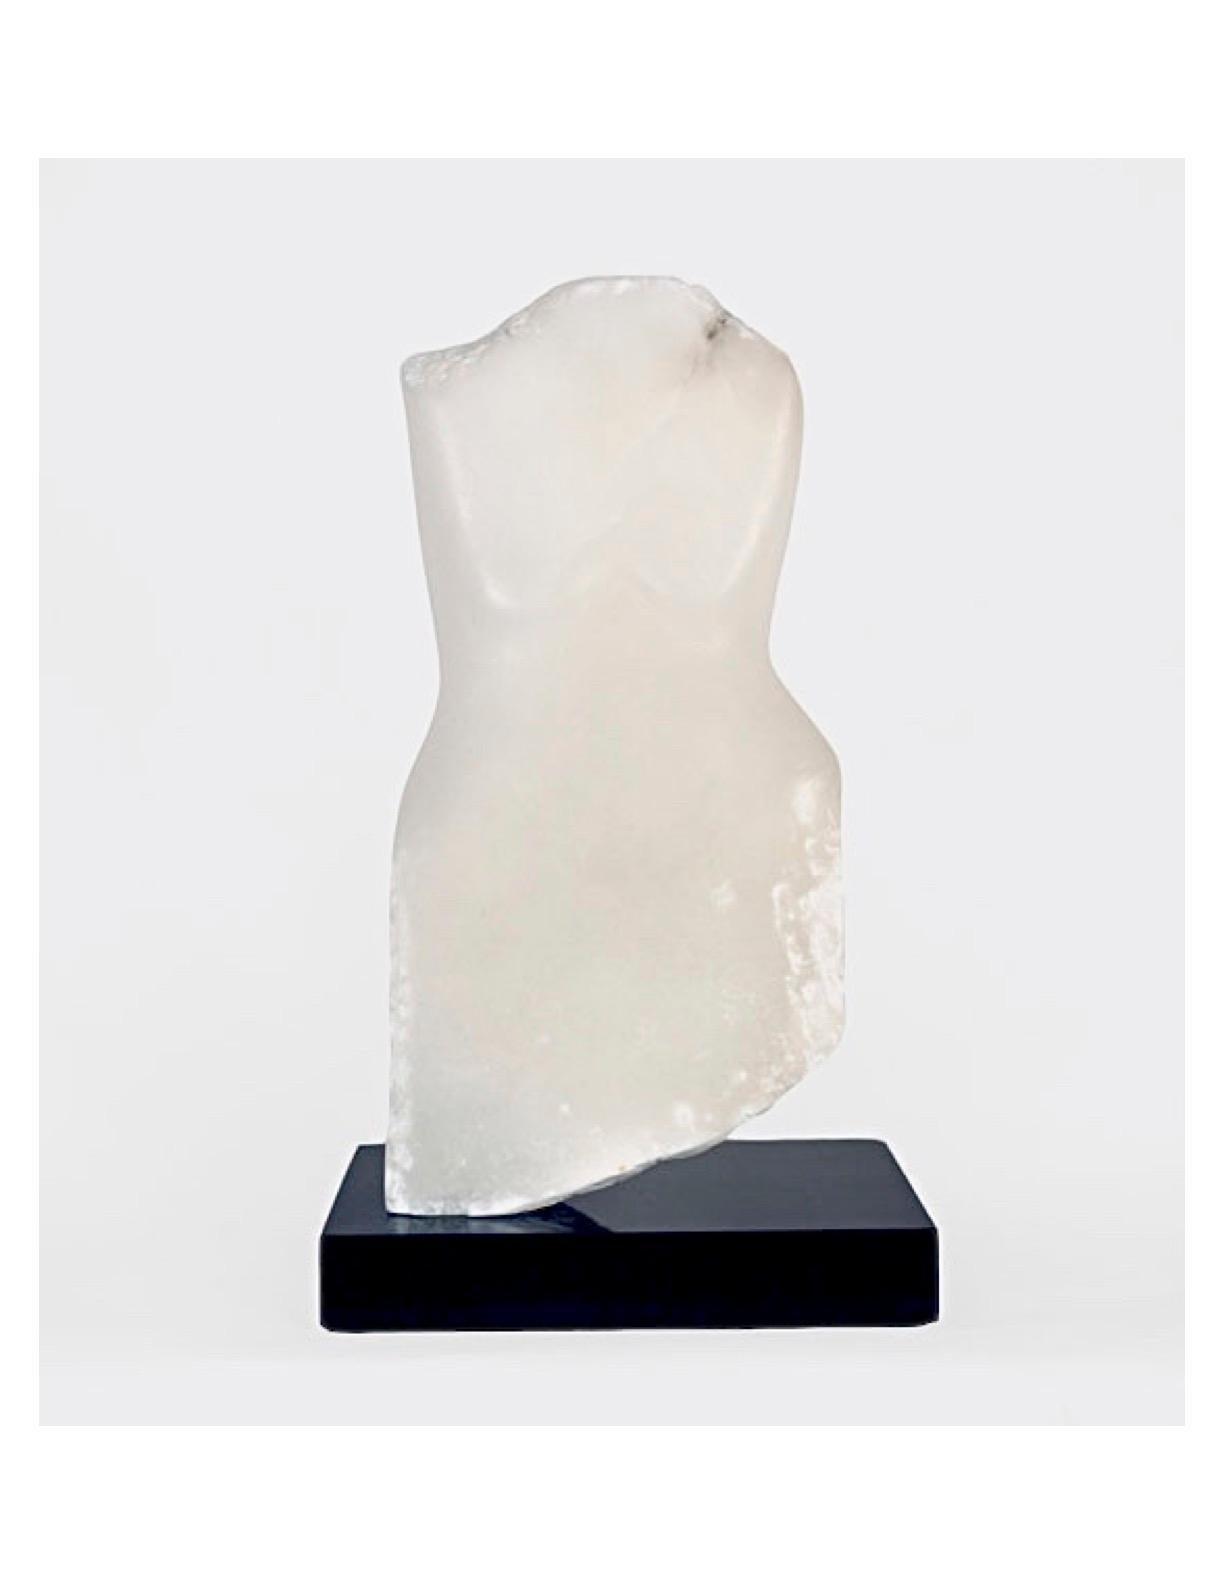 Wendy Hendelman White Alabaster Torso Sculpture, 2018 In Excellent Condition For Sale In New York, NY